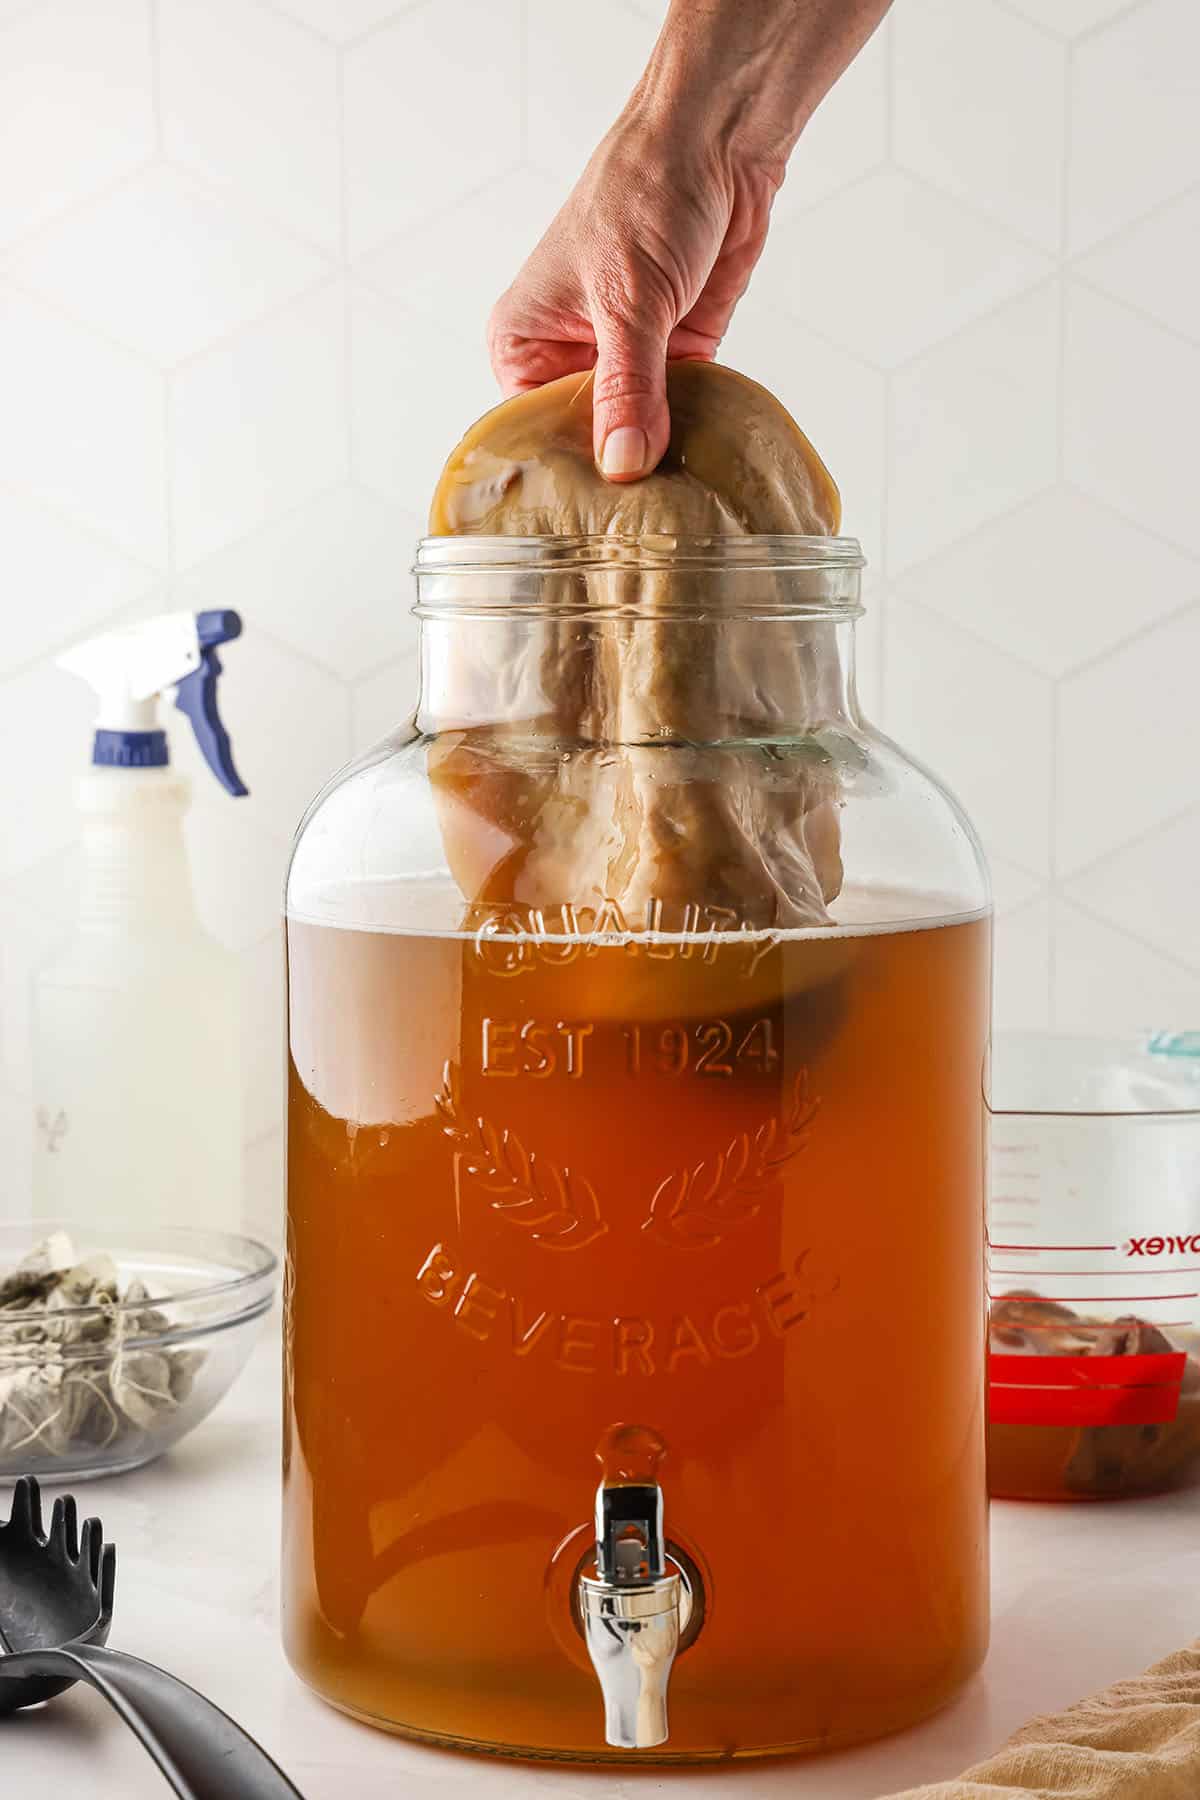 A gallon wide mouth jar with a spigot, holding green tea. A hand is carefully placing a SCOBY into the jar.